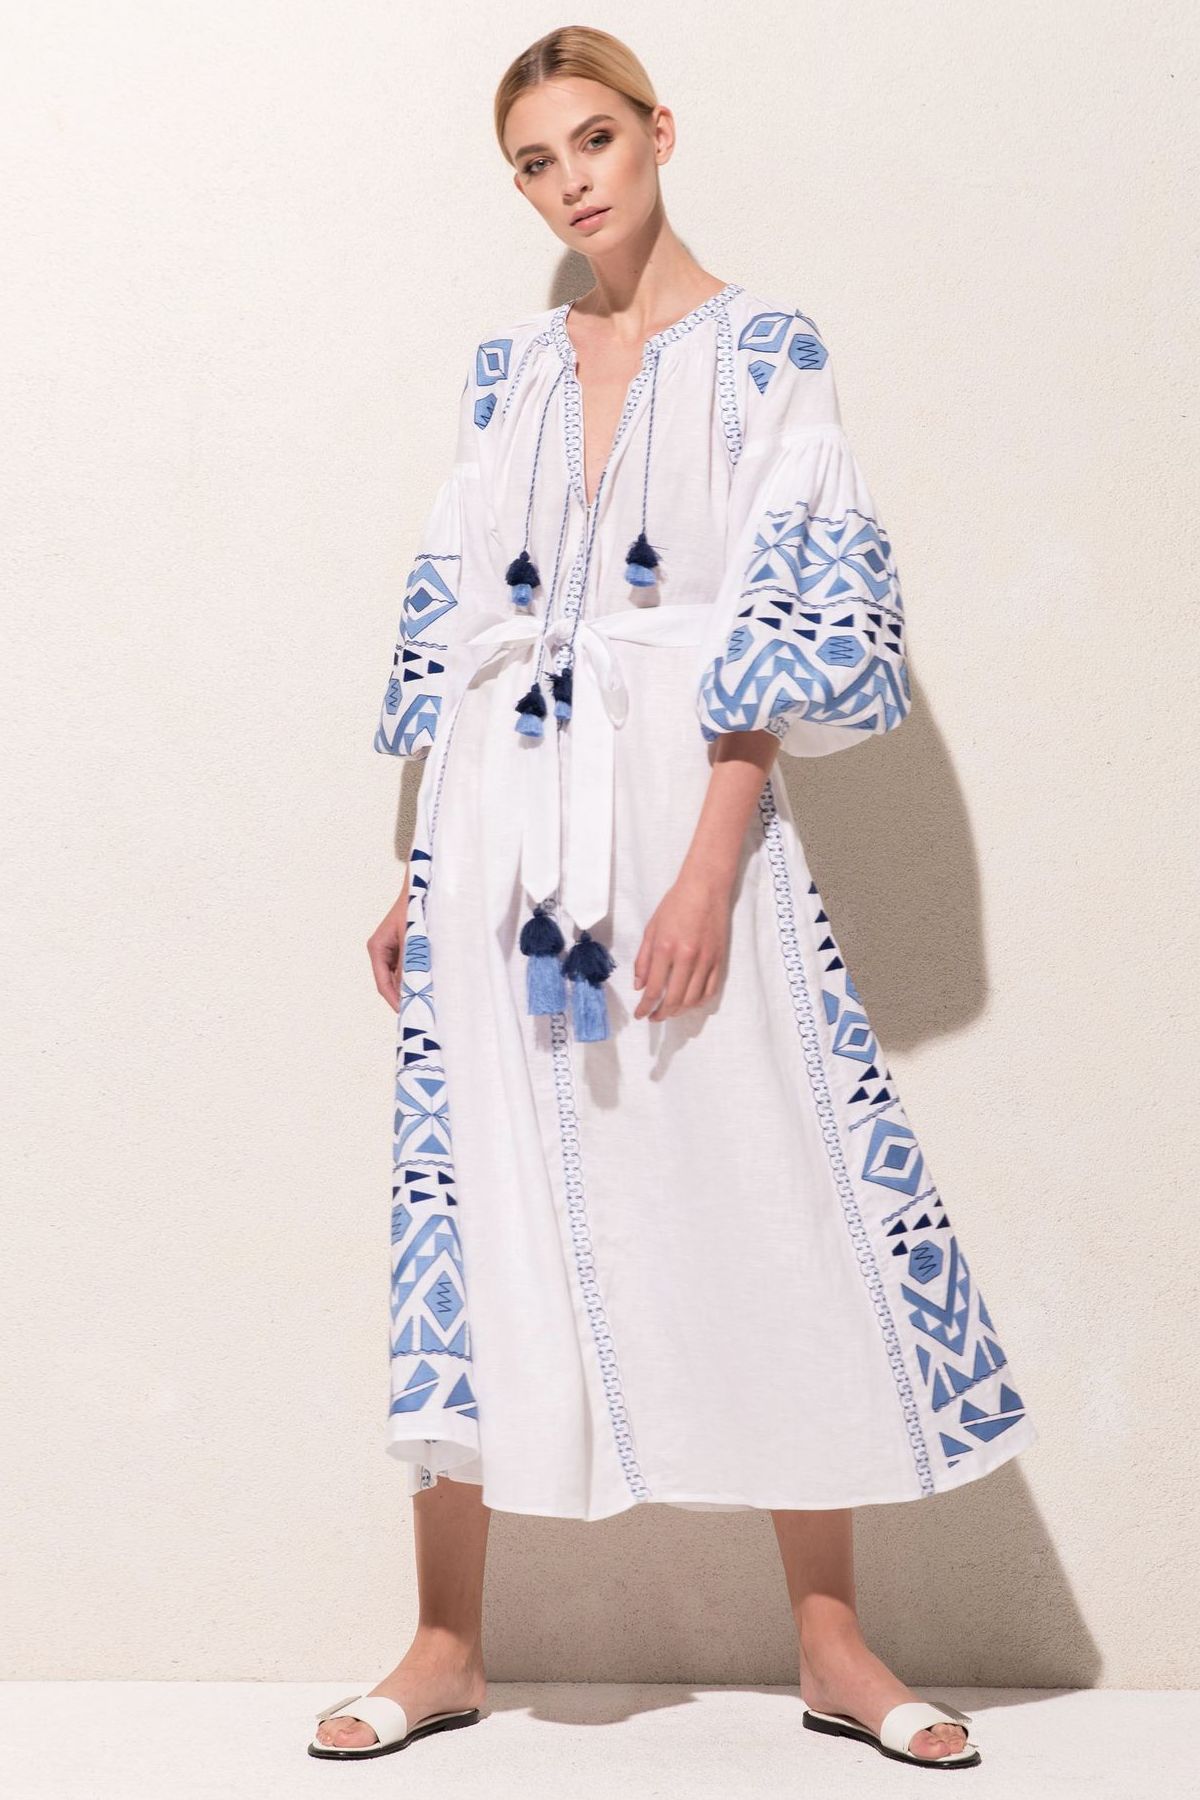 Embroidered dress Fashion boho outfit with ukrainian embroidery